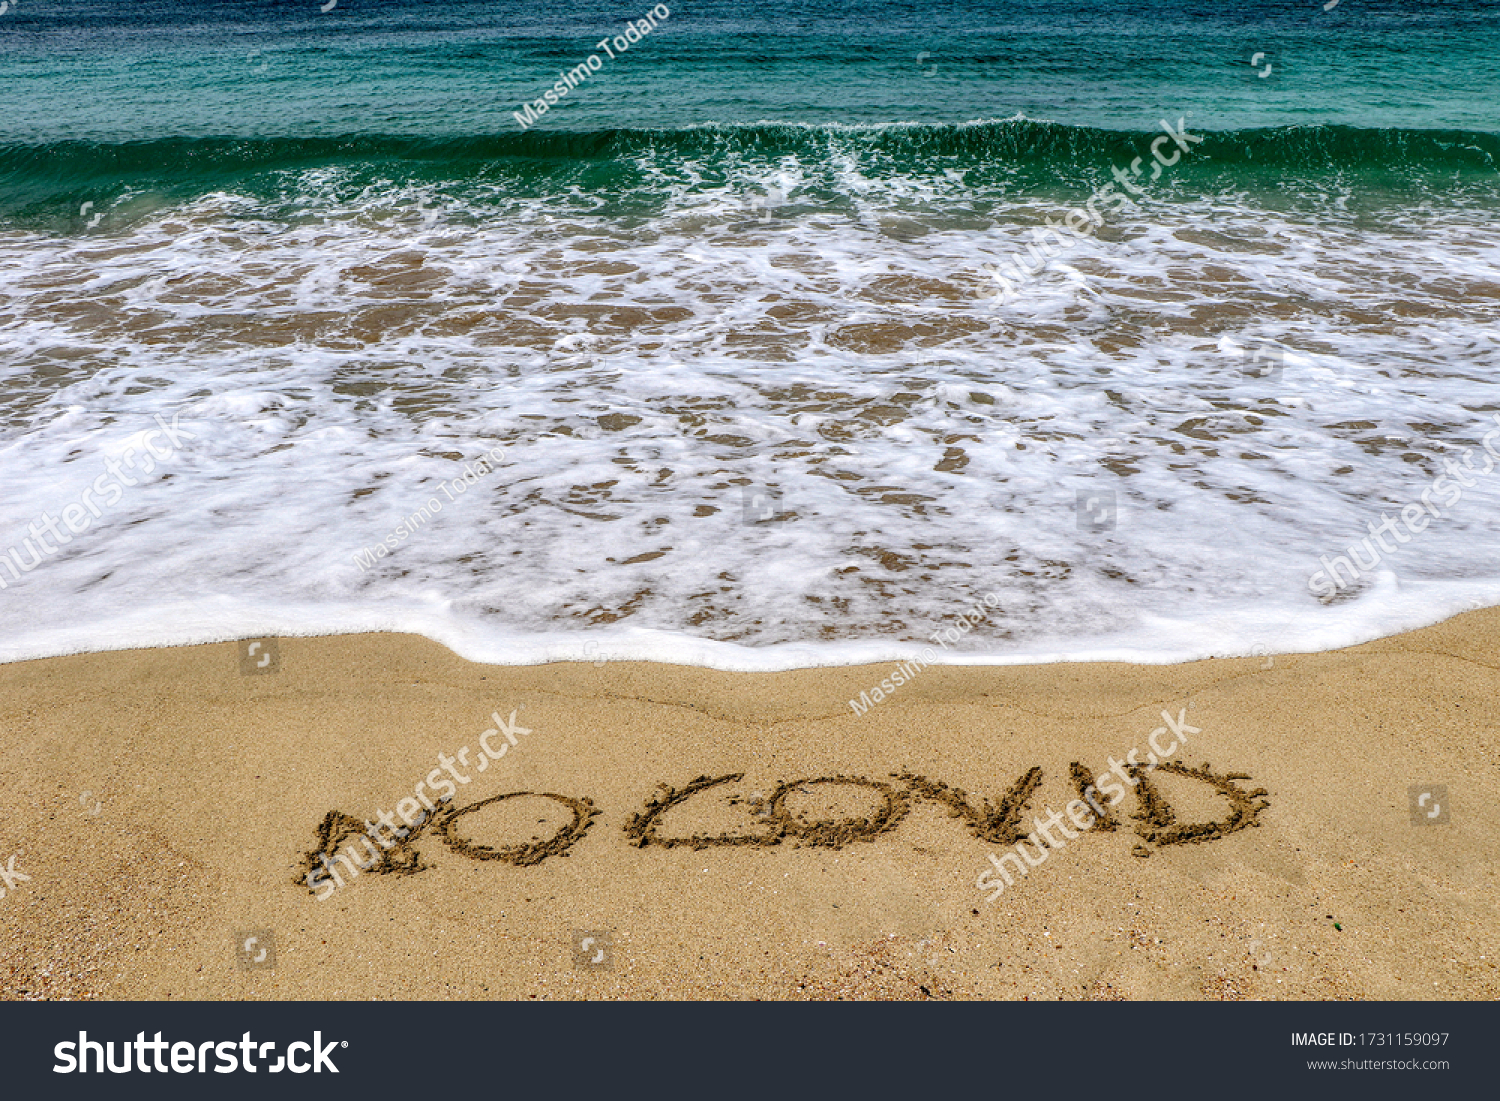 "No covid" written on the sand of the shore of a beach with incoming waves. Fear of beach resort managers for the upcoming summer season due to the coronavirus covid-19 #1731159097